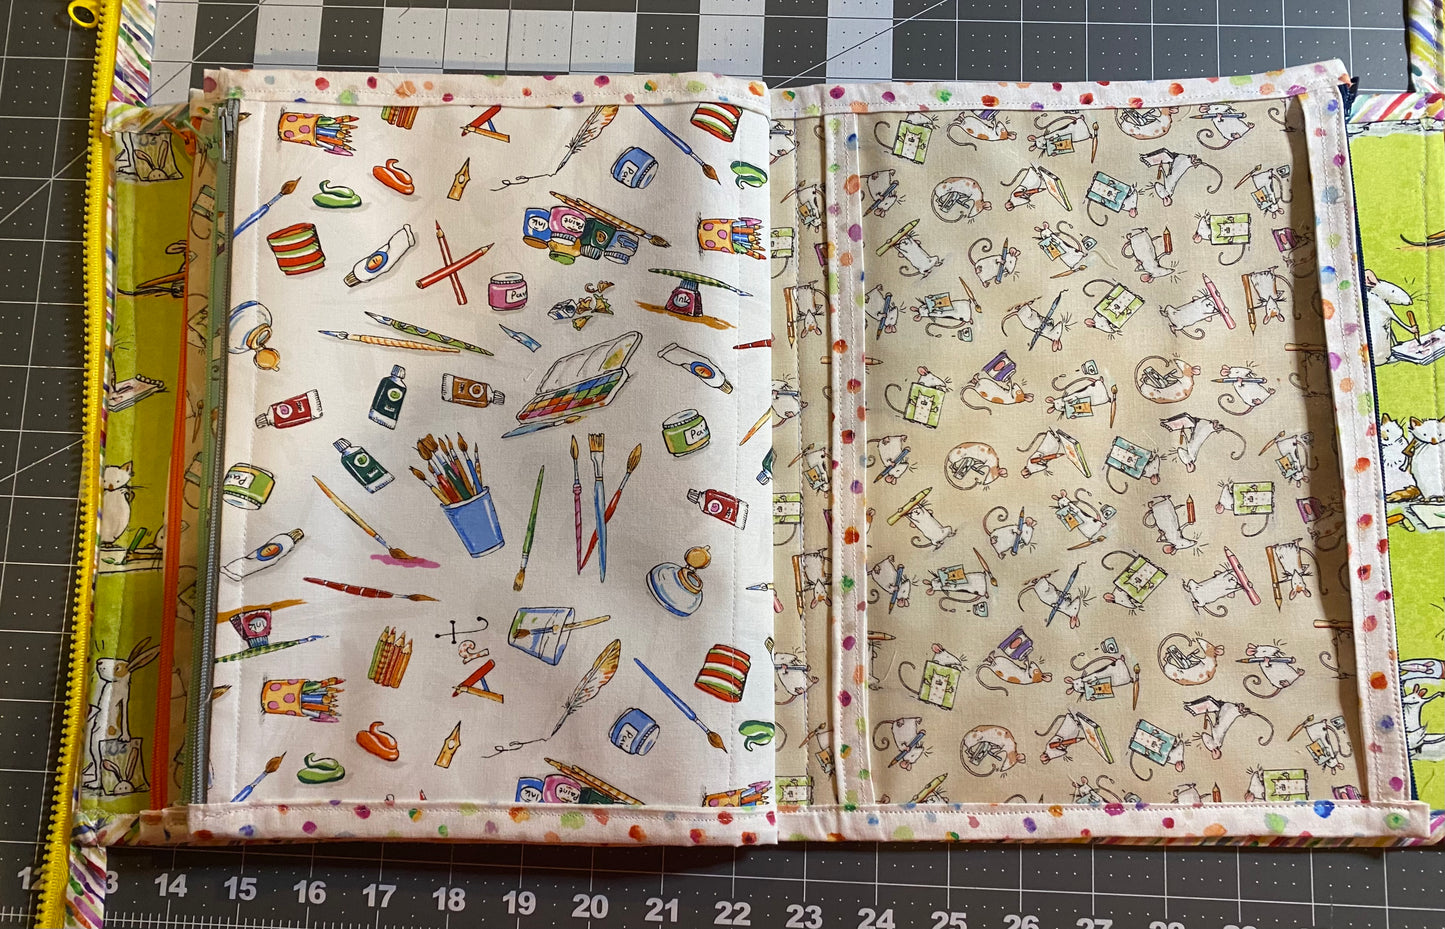 BOOKLET POUCH - MOUSE ARTISTS featuring fabrics from Art Club by Anita Jeram, Toad Hollow Bags